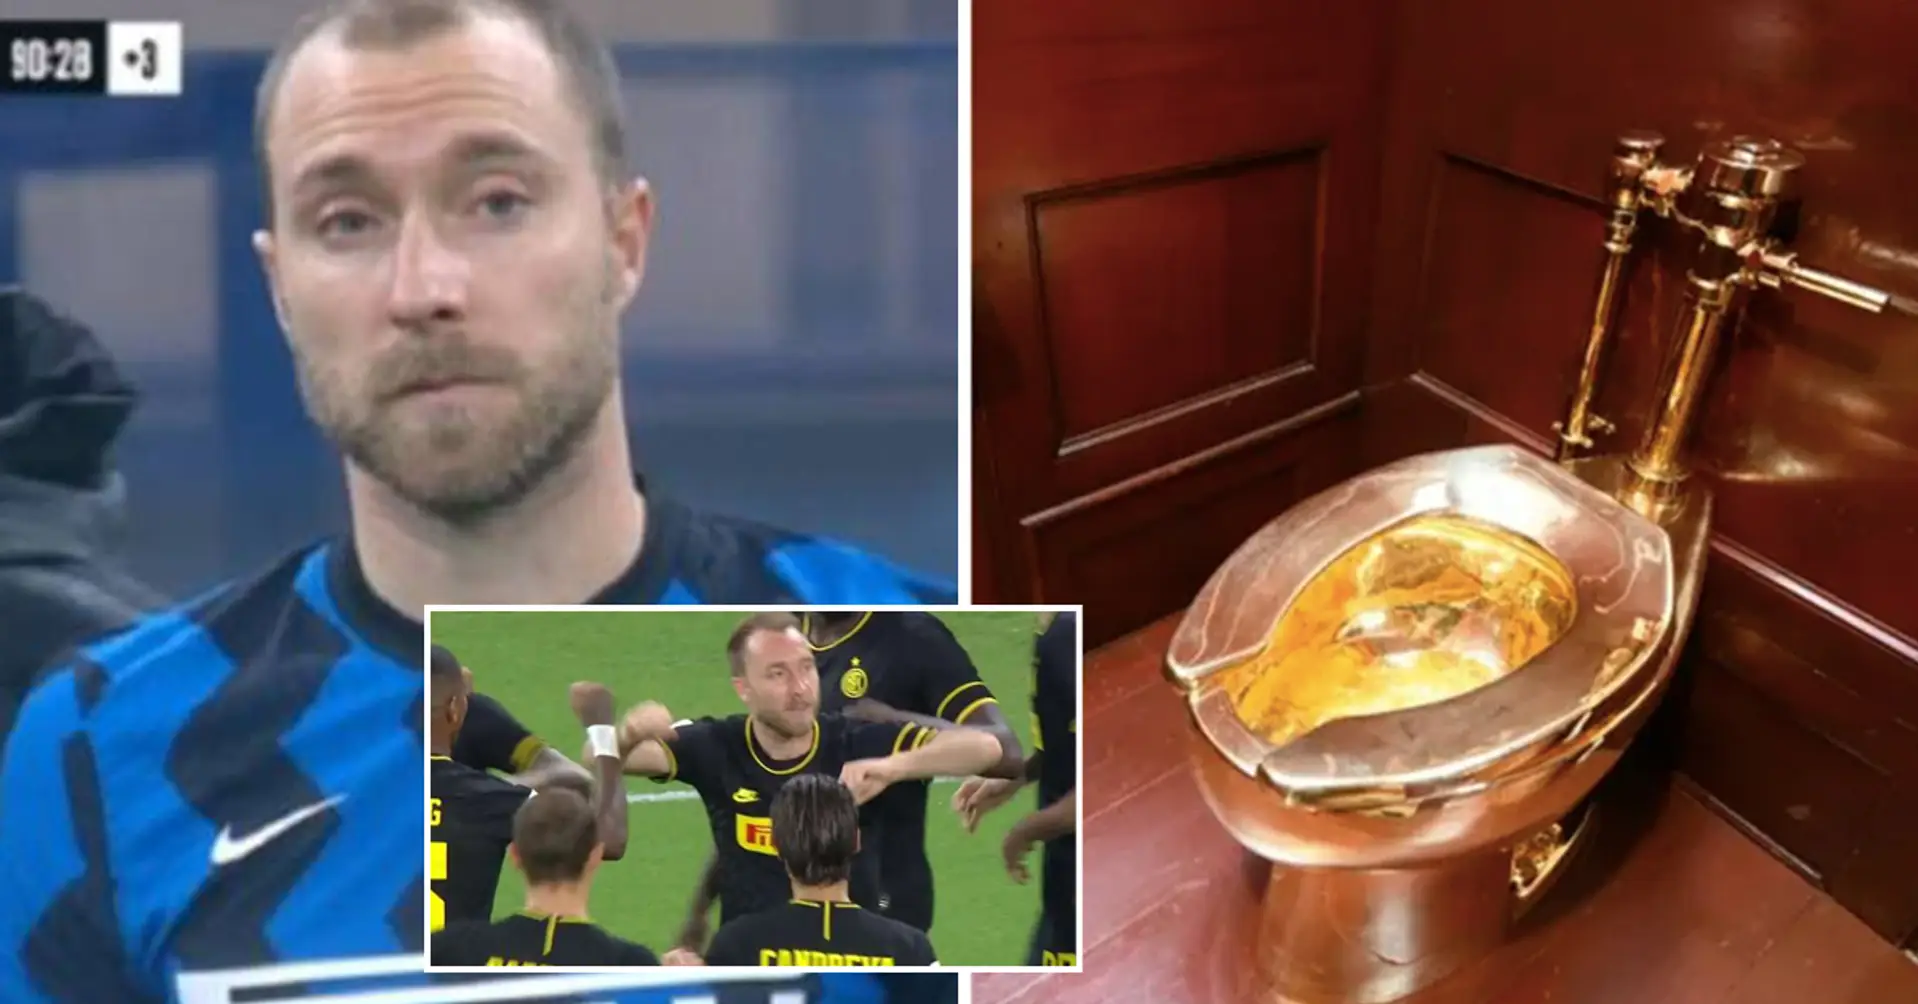 Christian Eriksen awarded Golden Toilet as the worst foreign player in Serie A in 2020